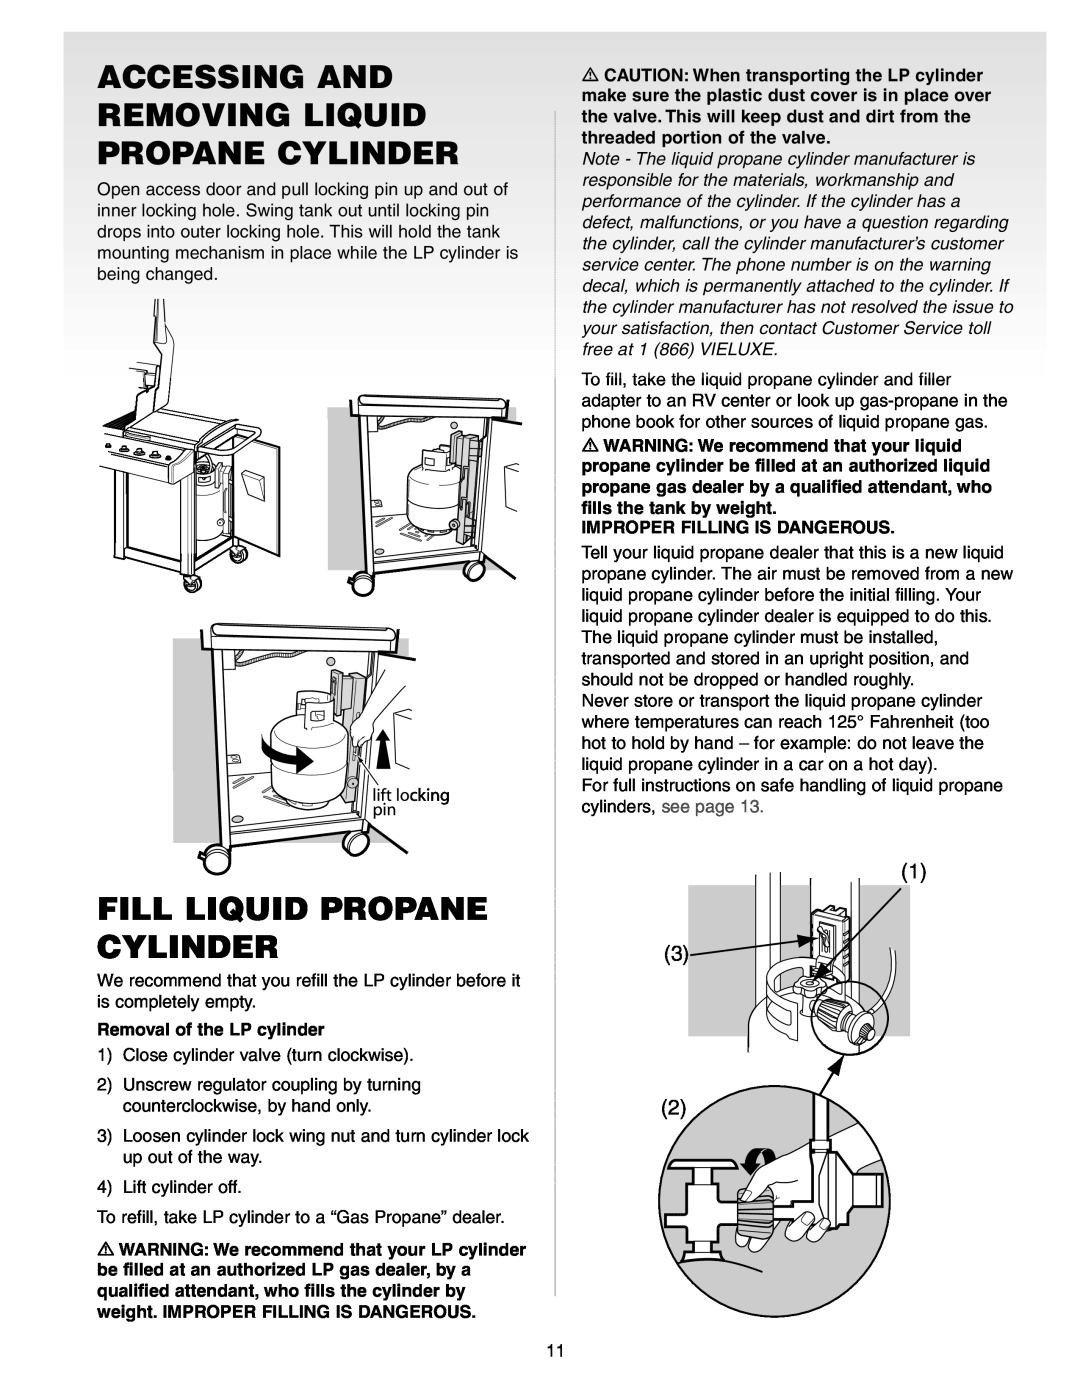 Weber Gas Burner manual Accessing And Removing Liquid Propane Cylinder, Fill Liquid Propane Cylinder 